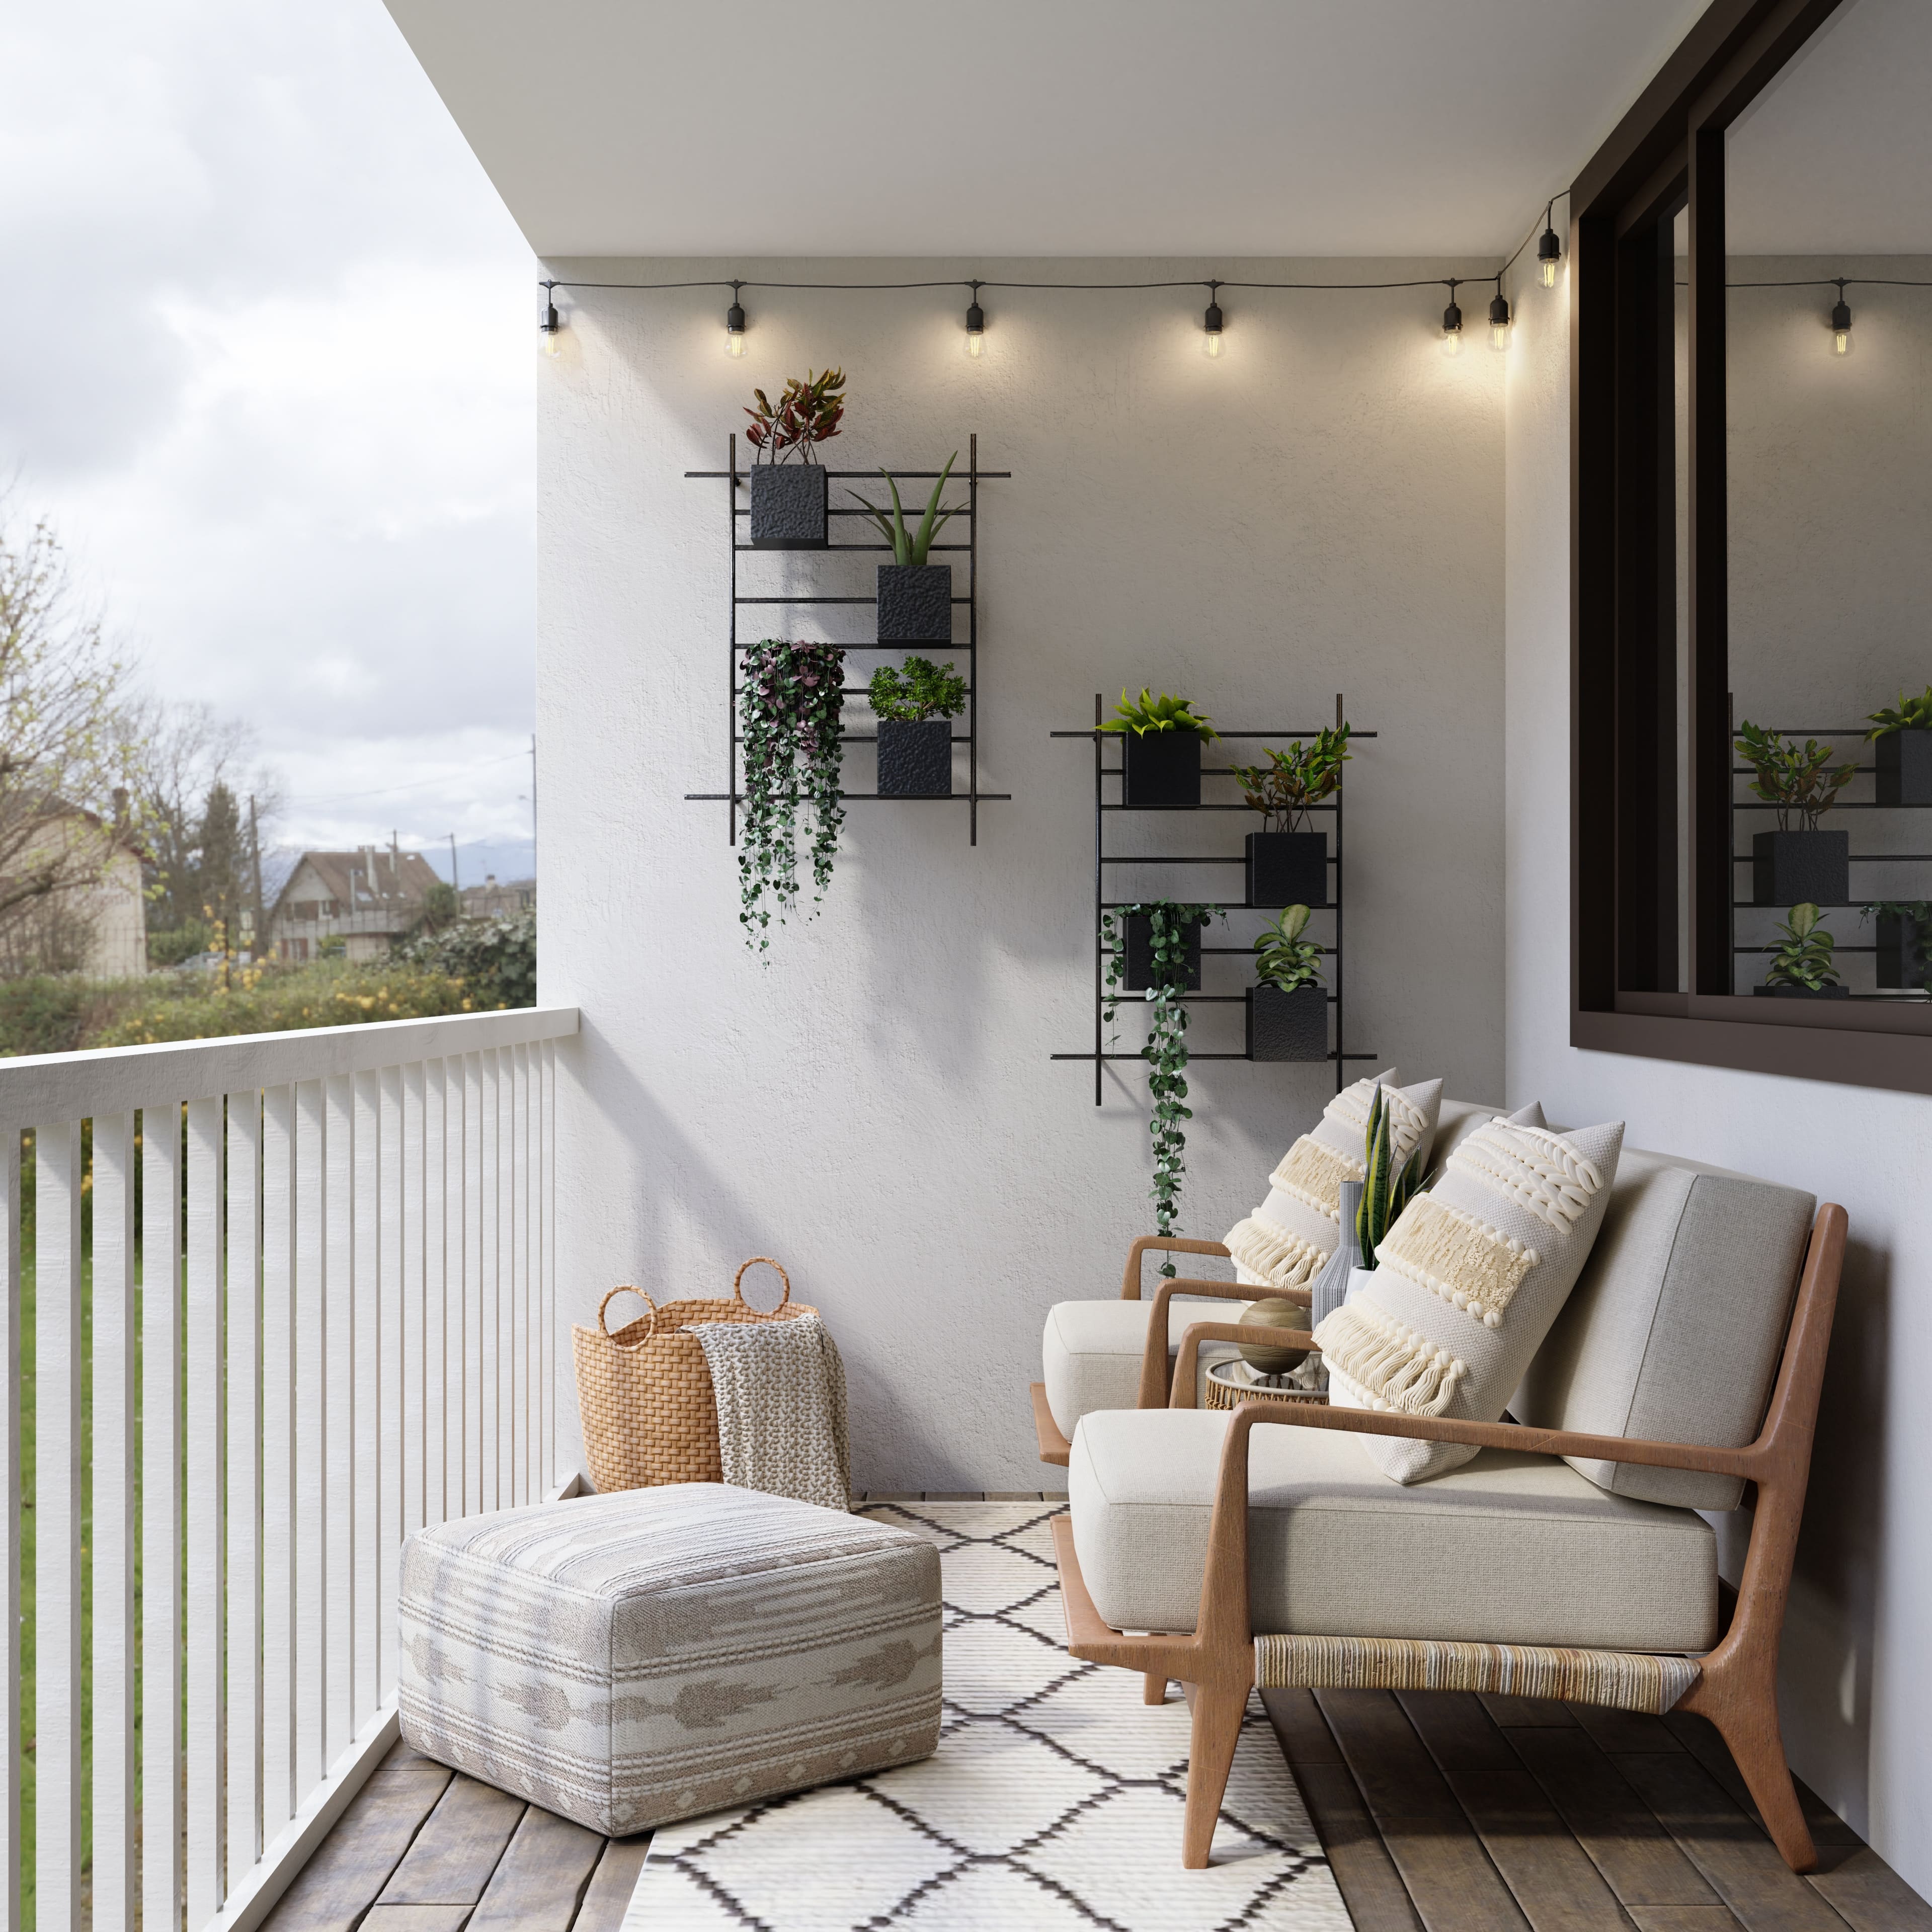 Balcony Safety 101: 5 Essential Tips for Childproofing and Security